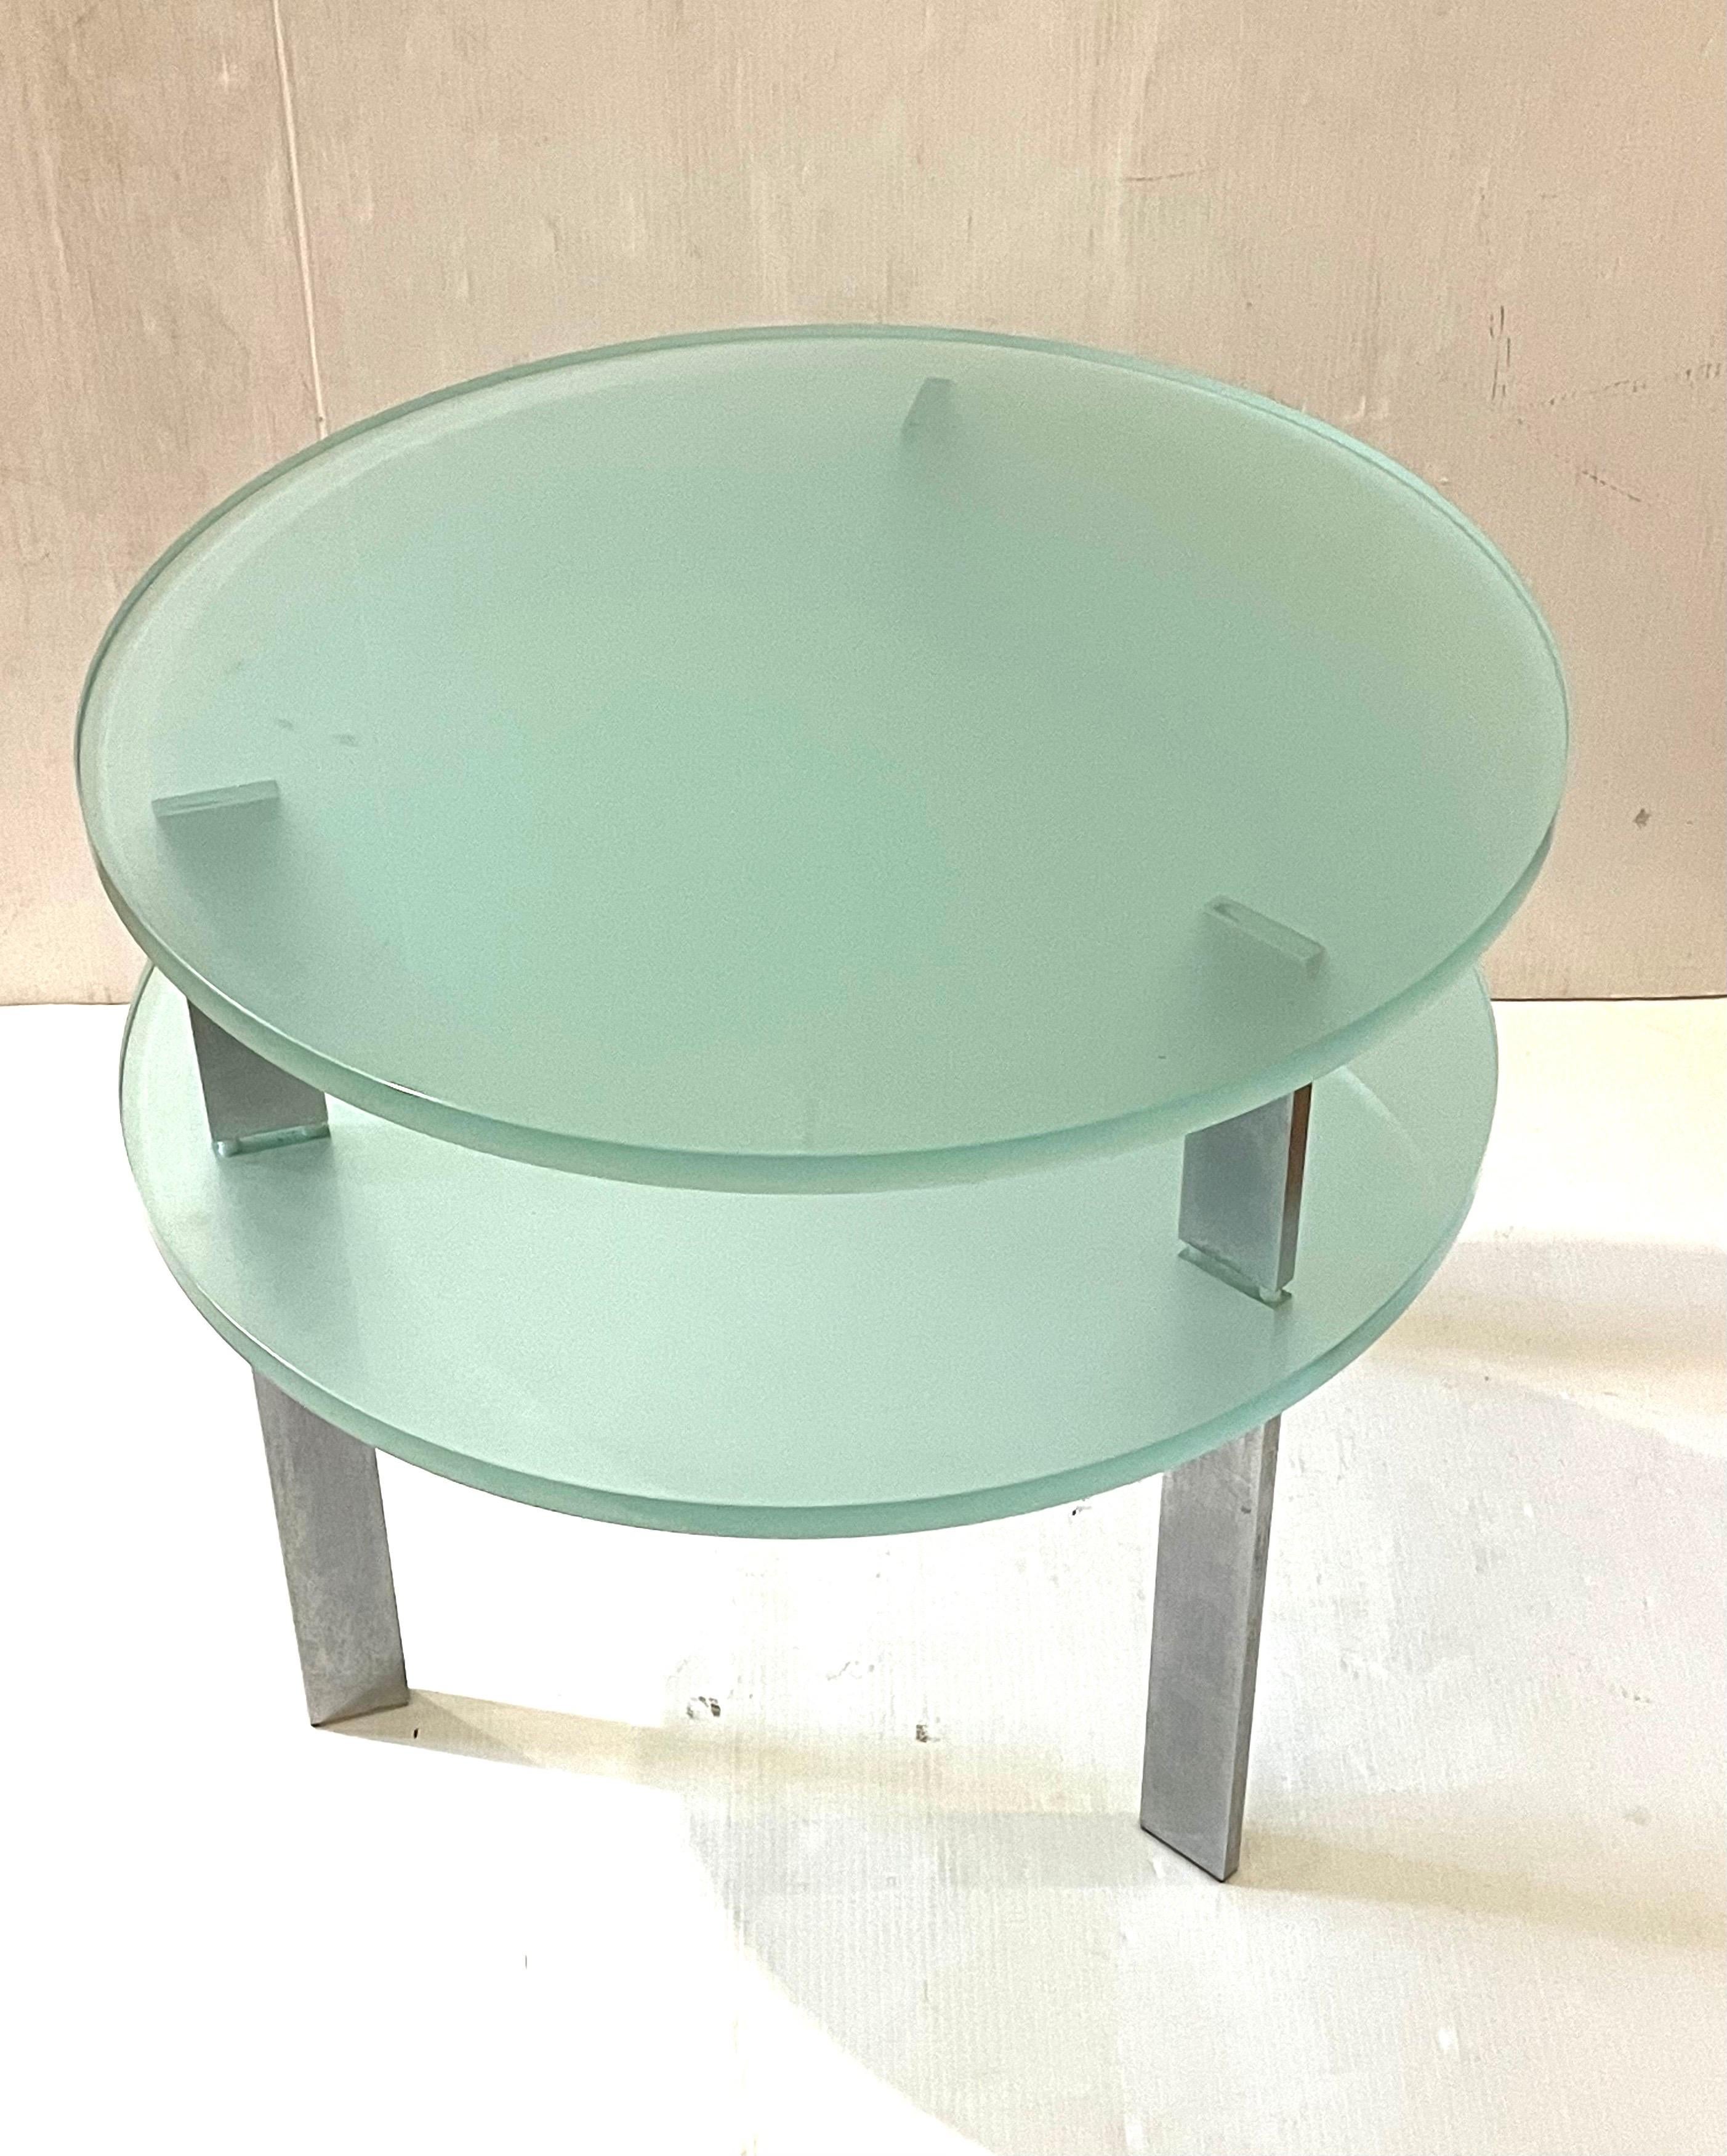 A very rare set of 2 end tables in frosted glass with aluminium legs end cocktail tables by Peter Coan for Pace furniture, circa 1980's Rea side table, these are very hard to find one of the tables shows small chip on the side as shown due to age